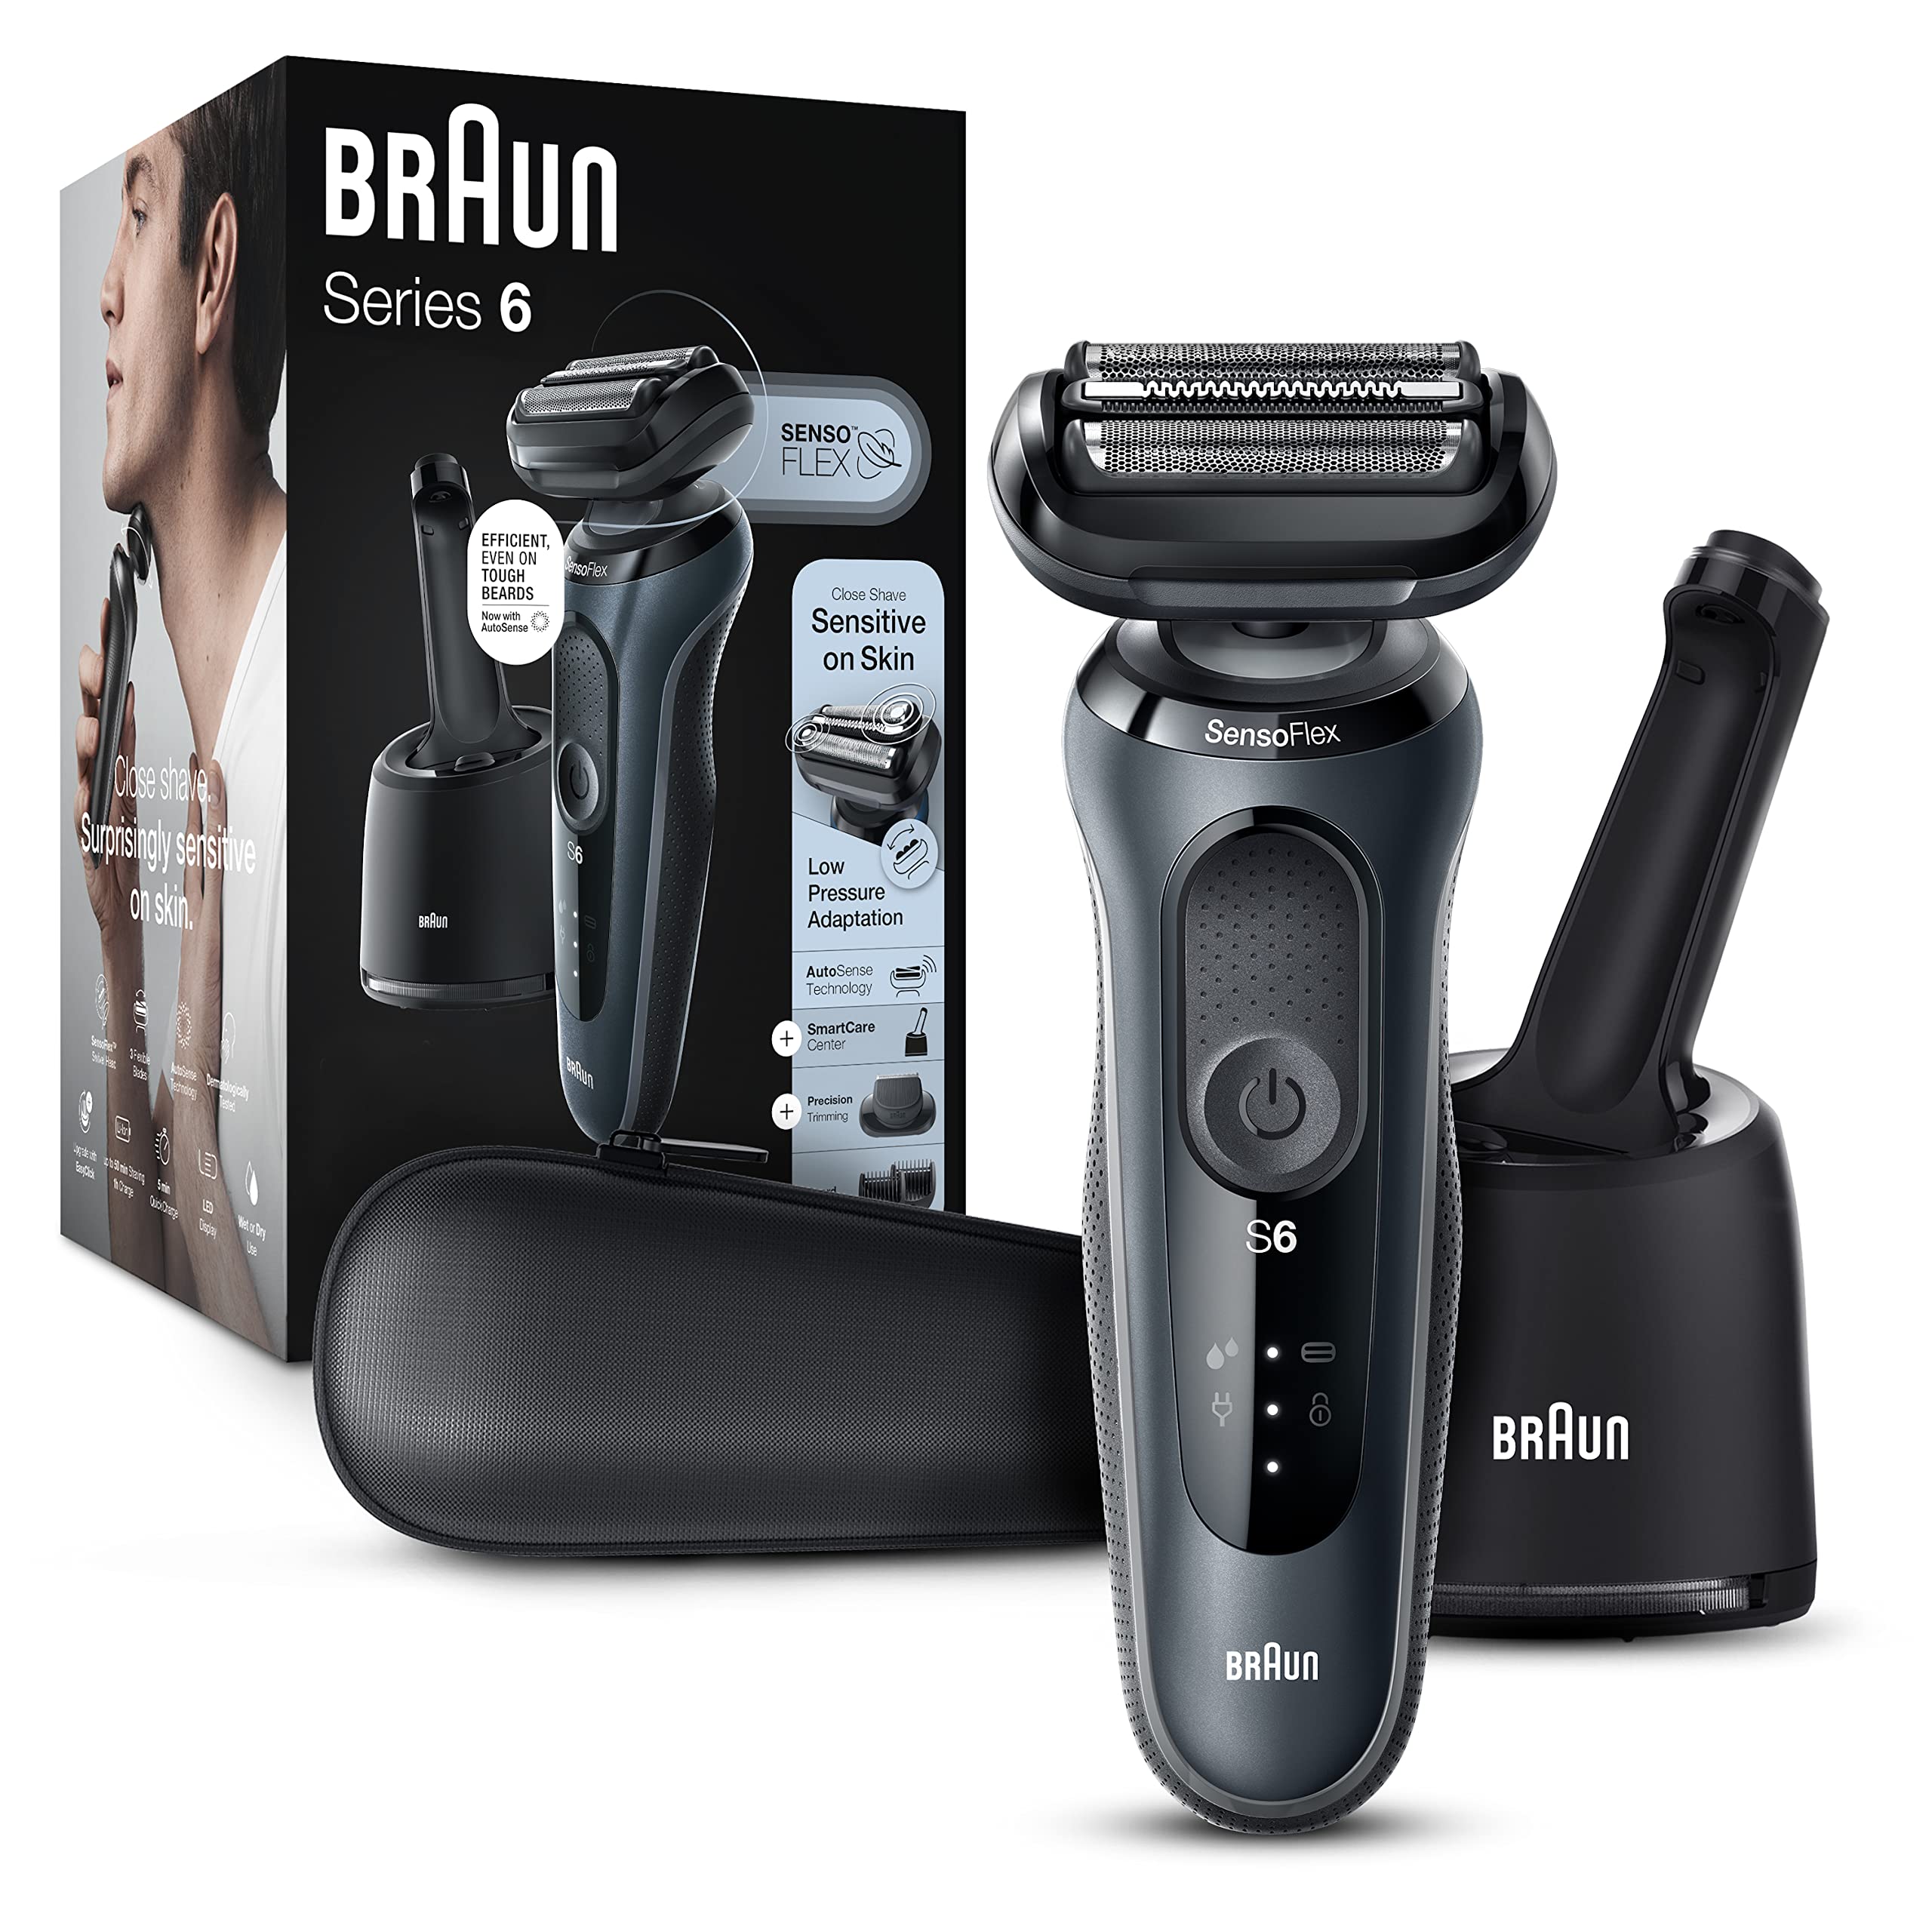 Braun Electric Razor for Trimmer Beard for Grooming, Series Center Men, Clean Black Charge Foil ,Rechargeable, Wet With & Shave, SmartCare & Dry Case 6 Waterproof Shaver, Leather and Travel 6075cc